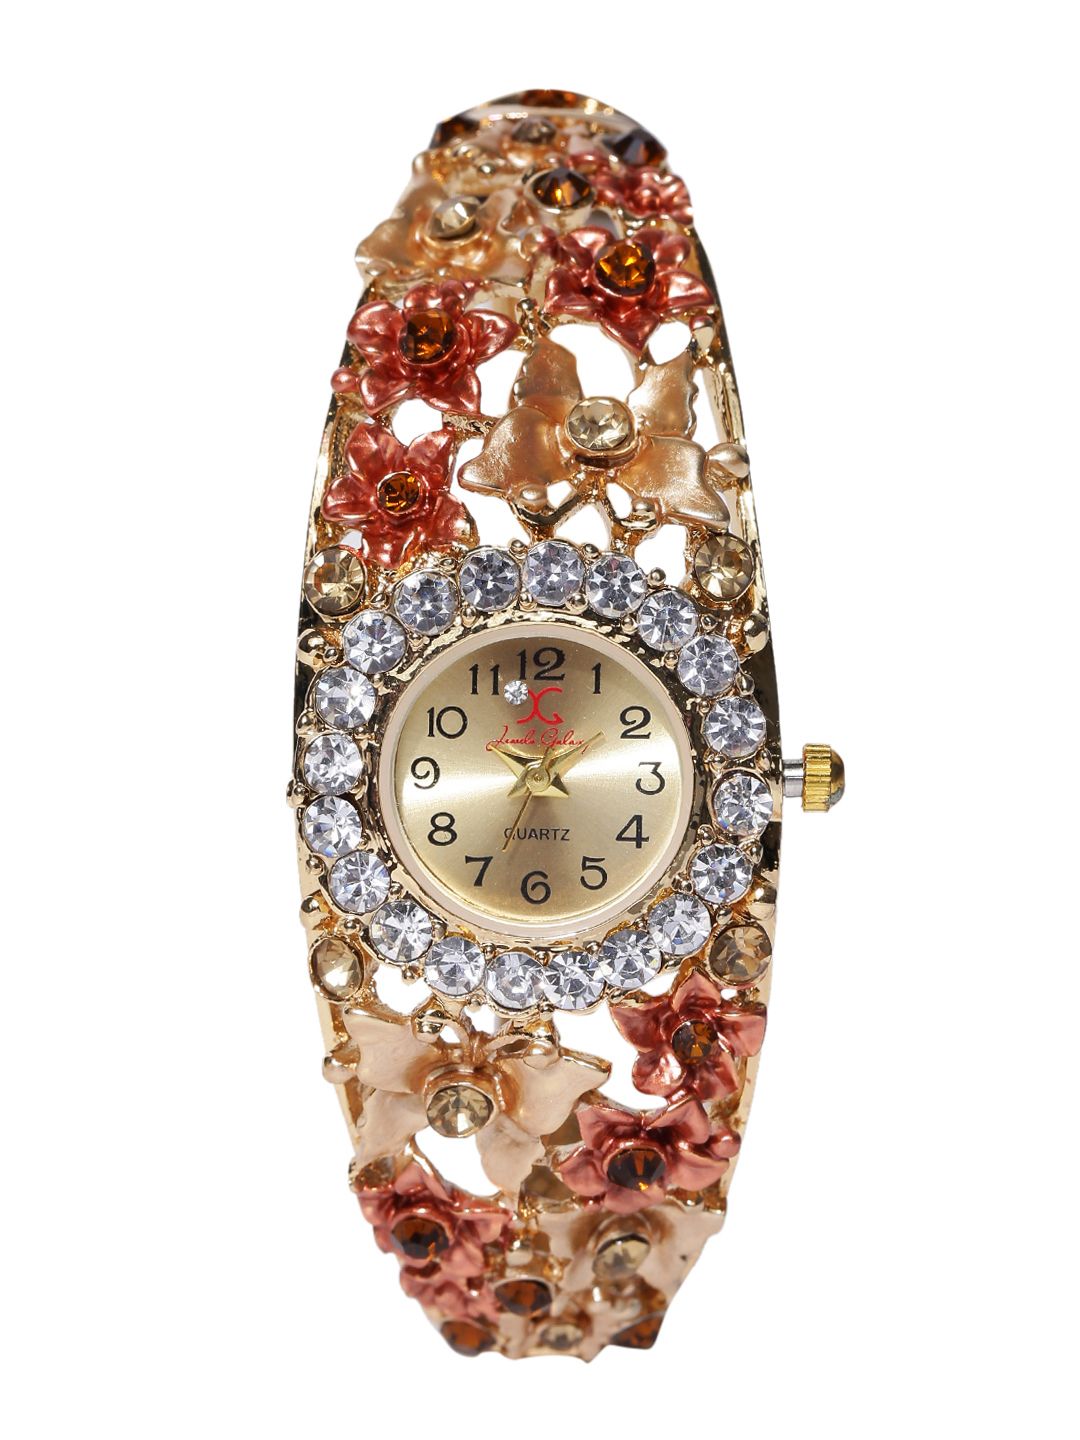 Jewels Galaxy Brown Gold-Plated Handcrafted Charm Bracelet cum Watch Price in India